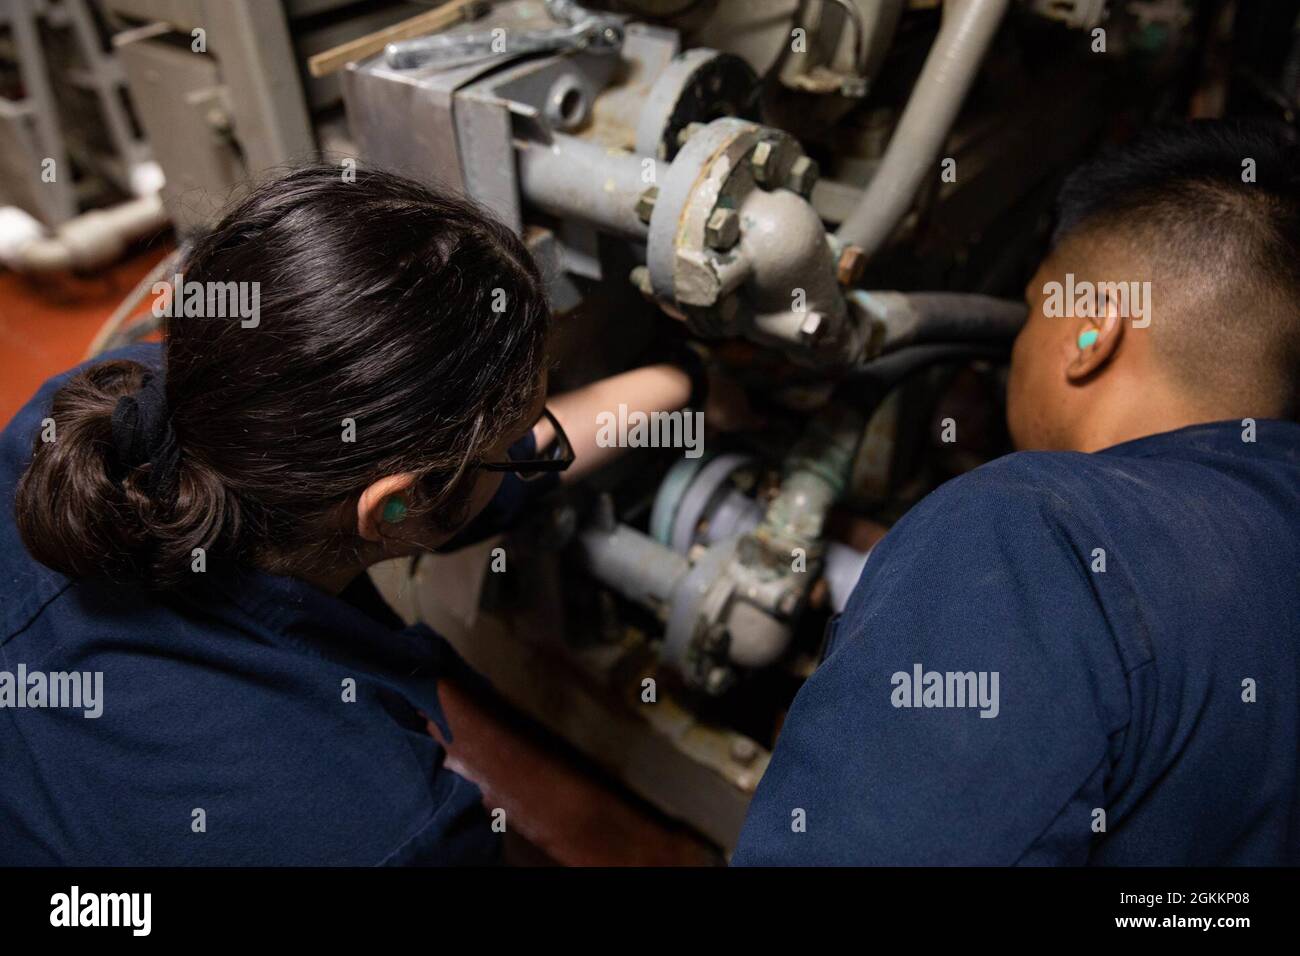 210519-N-CJ510-0244 ATLANTIC OCEAN (May 19, 2021) Gas Turbine Systems Technician (Mechanical) Fireman Arizbeth Cardenas, left, and Gas Turbine Systems Technician (Mechanical) 3rd Class Reynante Imperial conduct maintenance on a low pressure air compressor in a main space aboard the Arleigh Burke-class guided-missile destroyer USS Roosevelt (DDG 80), May 19, 2021. Roosevelt is participating in At-Sea Demo/Formidable Shield, conducted by Naval Striking and Support Forces NATO on behalf of U.S. Sixth Fleet, is a live-fire integrated air and missile defense (IAMD) exercise that improves Allied int Stock Photo